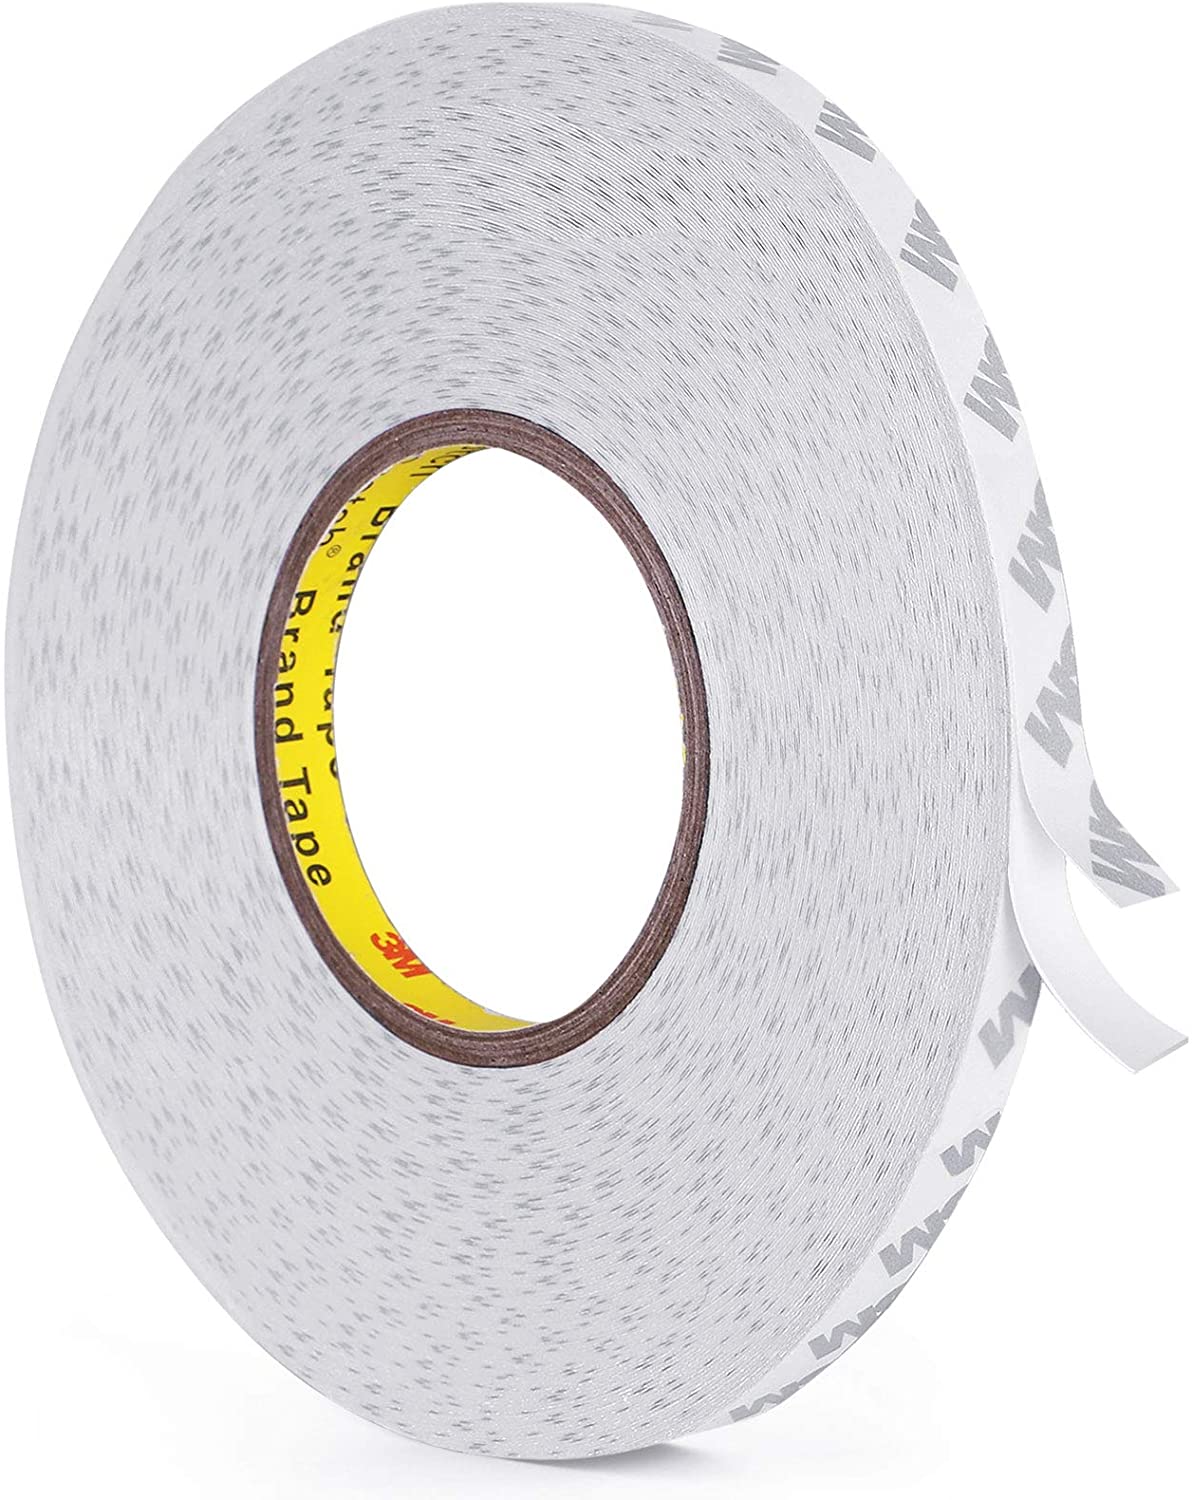 Heldig Double Sided Tape, 164FT Length, 0.39 Inch Width Thin Waterproof  Mounting Tape, Easy Peel Off Two Sided Tape Foam Tape for Led Strip Lights